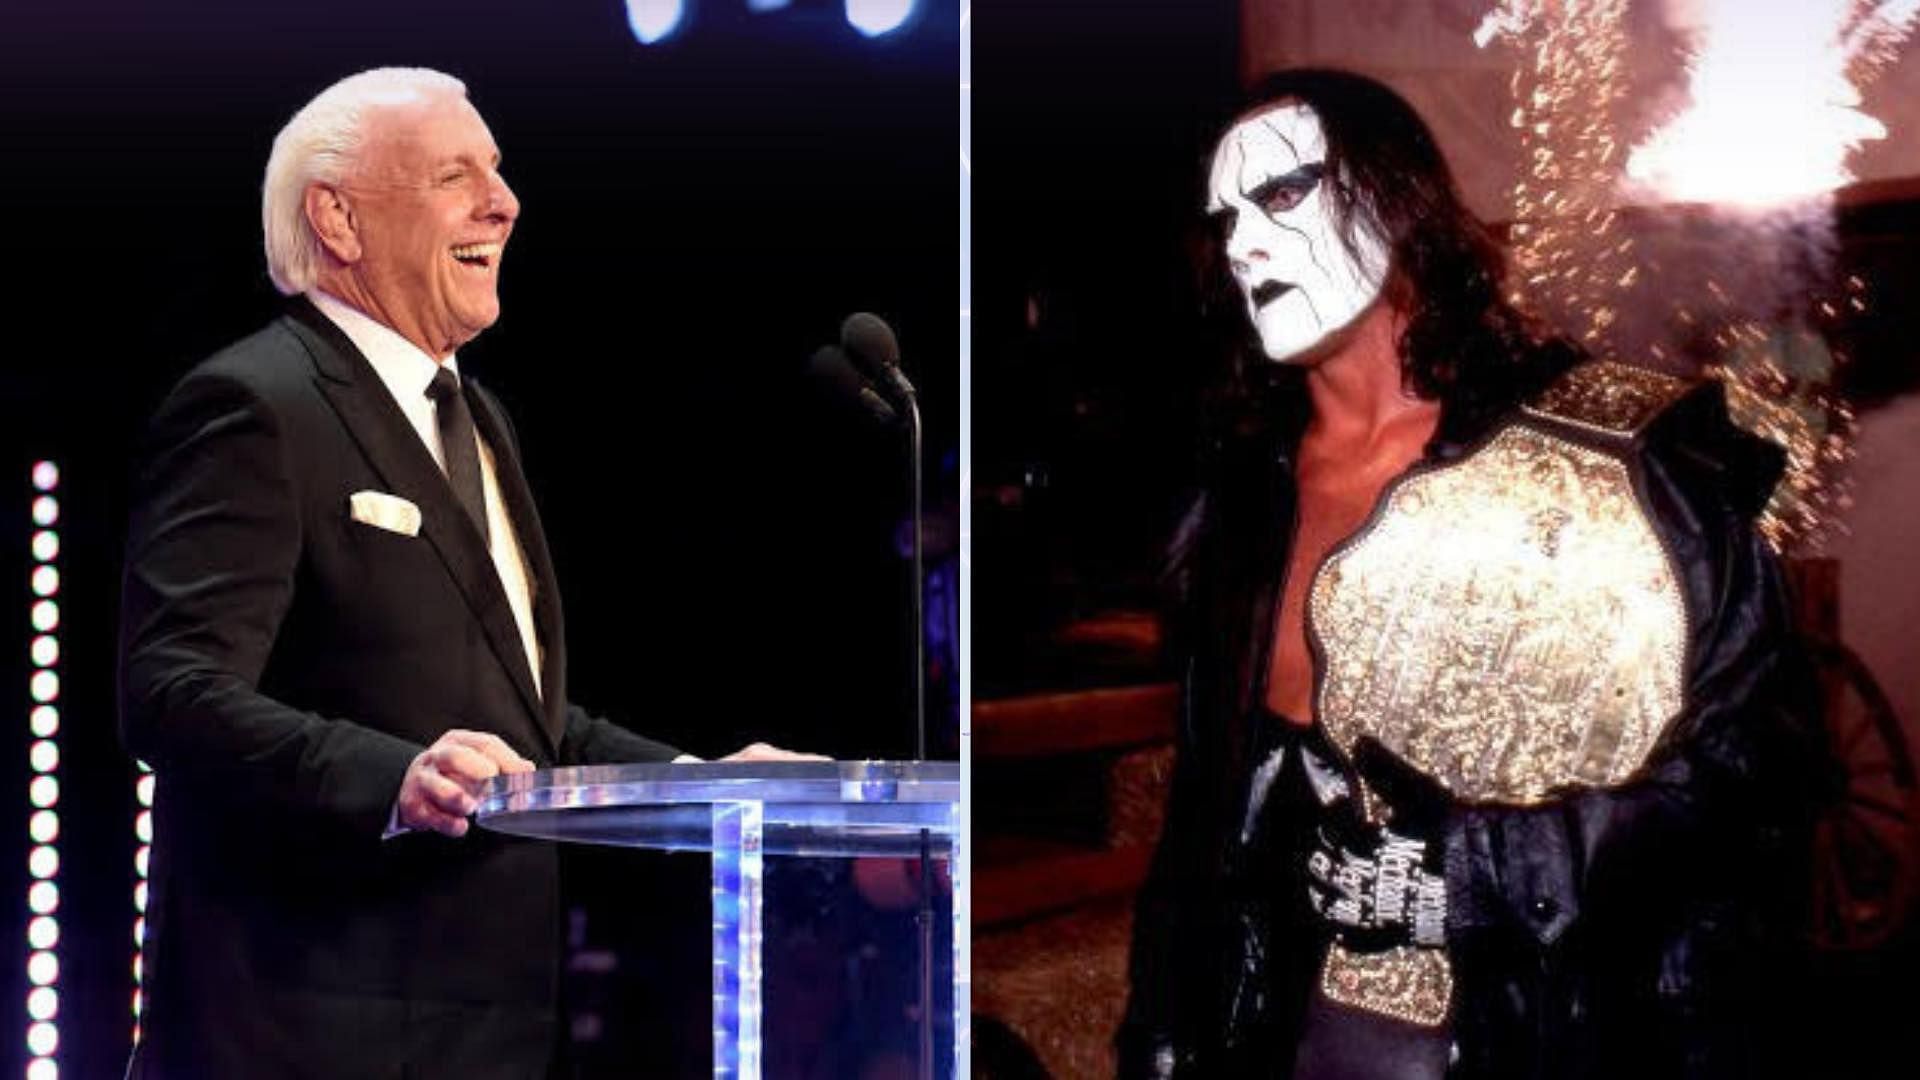 Sting and Ric Flair are beloved wrestling veterans